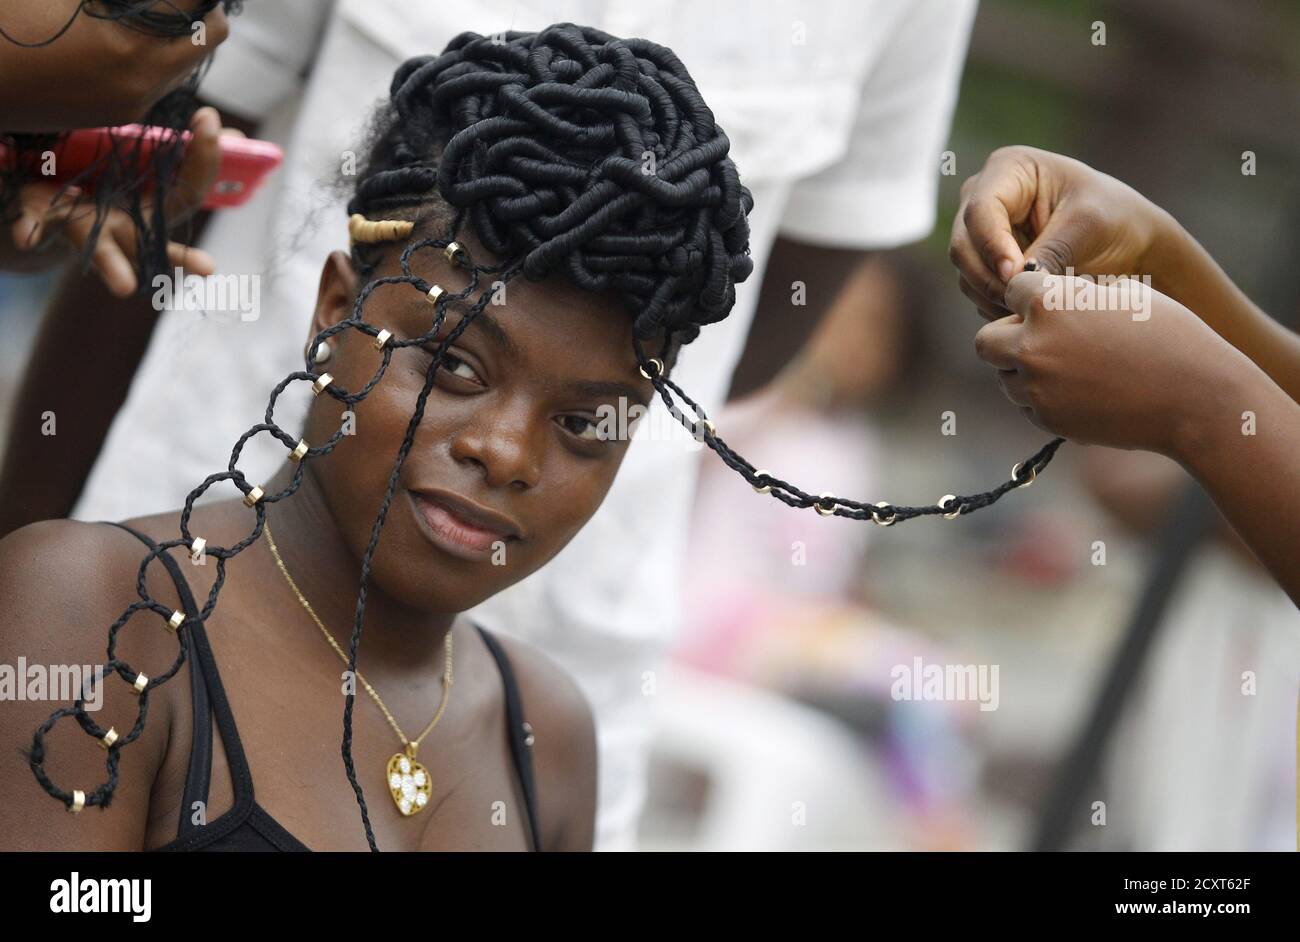 A woman gets an African-Colombian hairstyle during the Afro-hairstyles XI  Competition in Cali, Colombia May 17, 2015. REUTERS/Jaime Saldarriaga Stock  Photo - Alamy